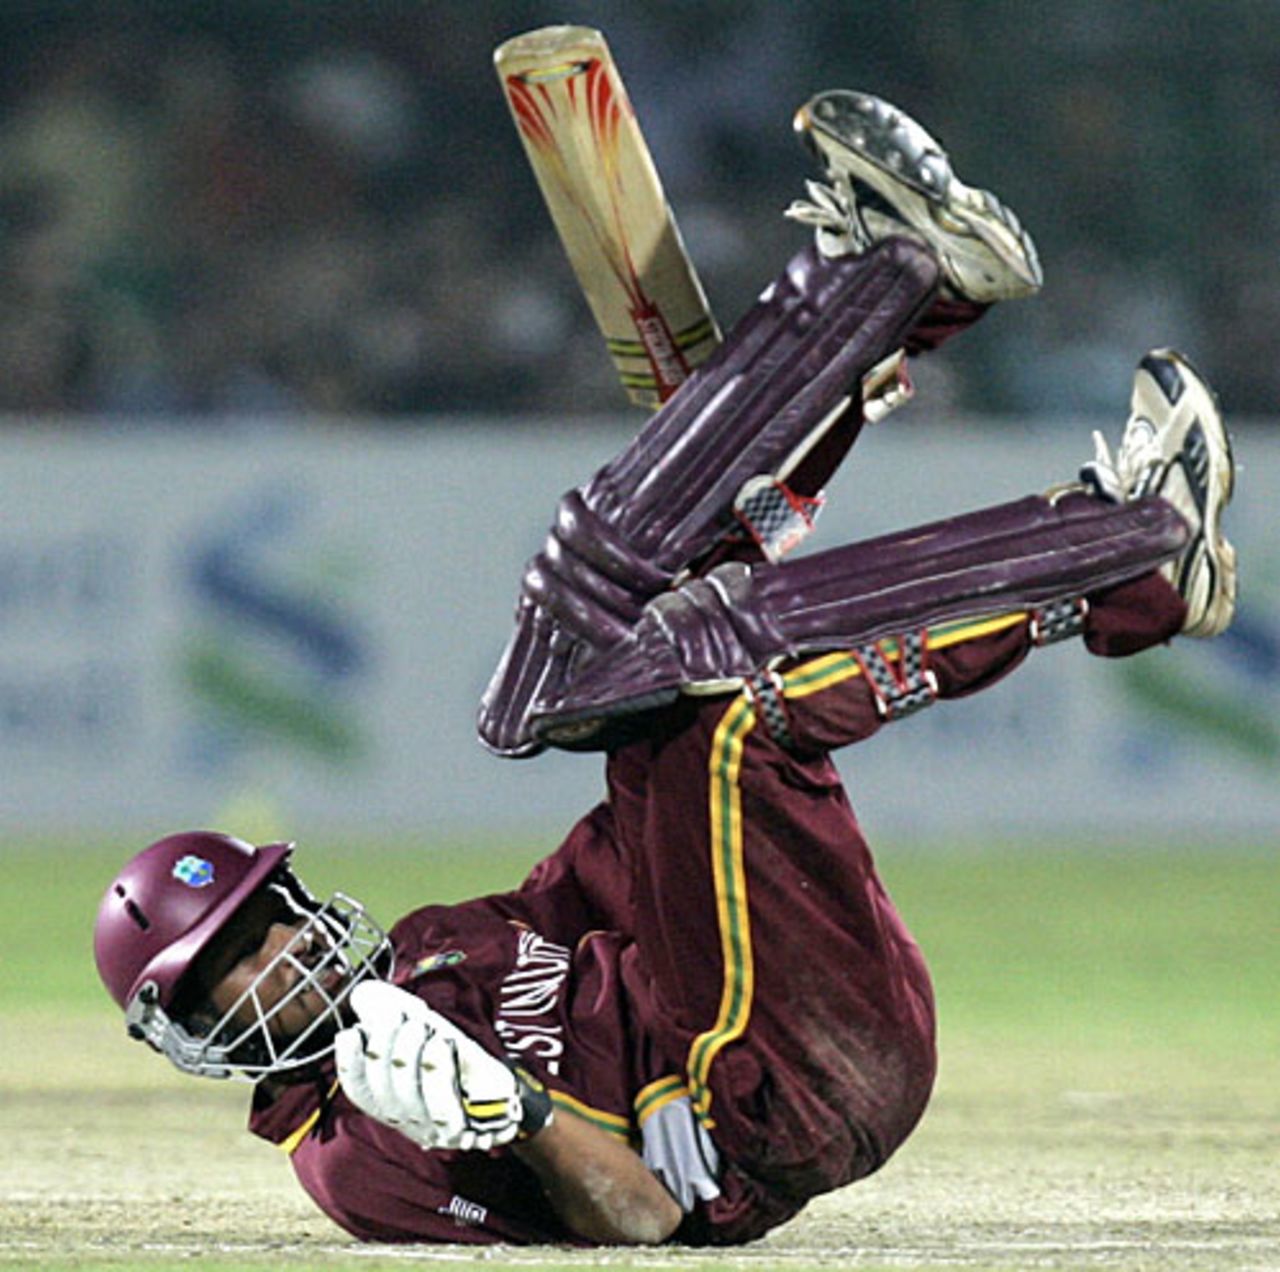 Ramnaresh Sarwan evades an Andre Nel bouncer, South Africa v West Indies, 2nd semi-final, Champions Trophy, Jaipur, November 2, 2006